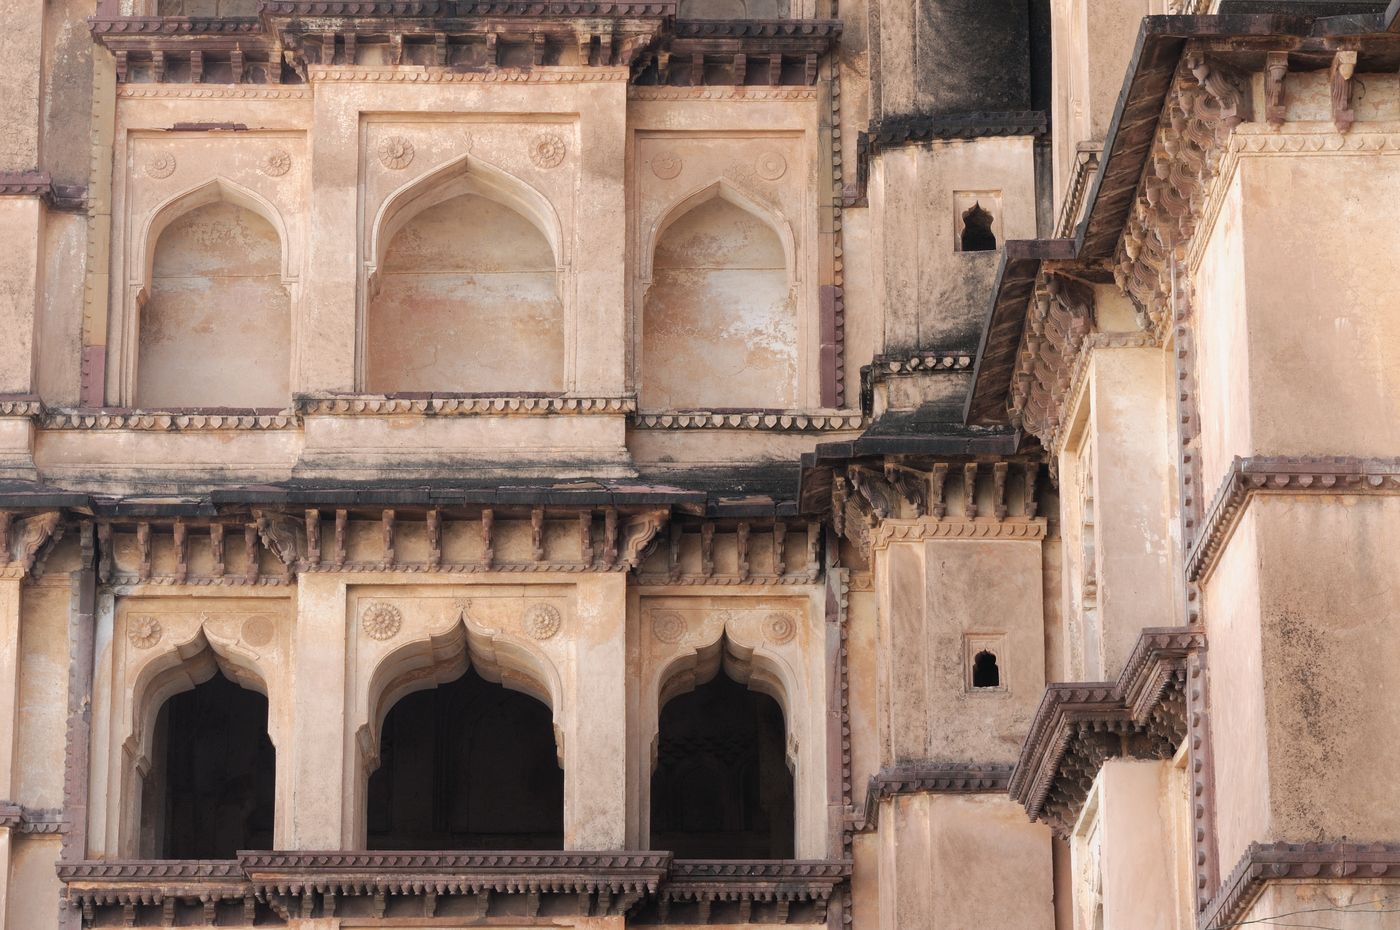 The Jahangir Mahal is a 17th century mansion located in Orchha, Madhya Pradesh. The monument is known of its fine and vivid Indo Islamic architectural style which makes it a must visit 